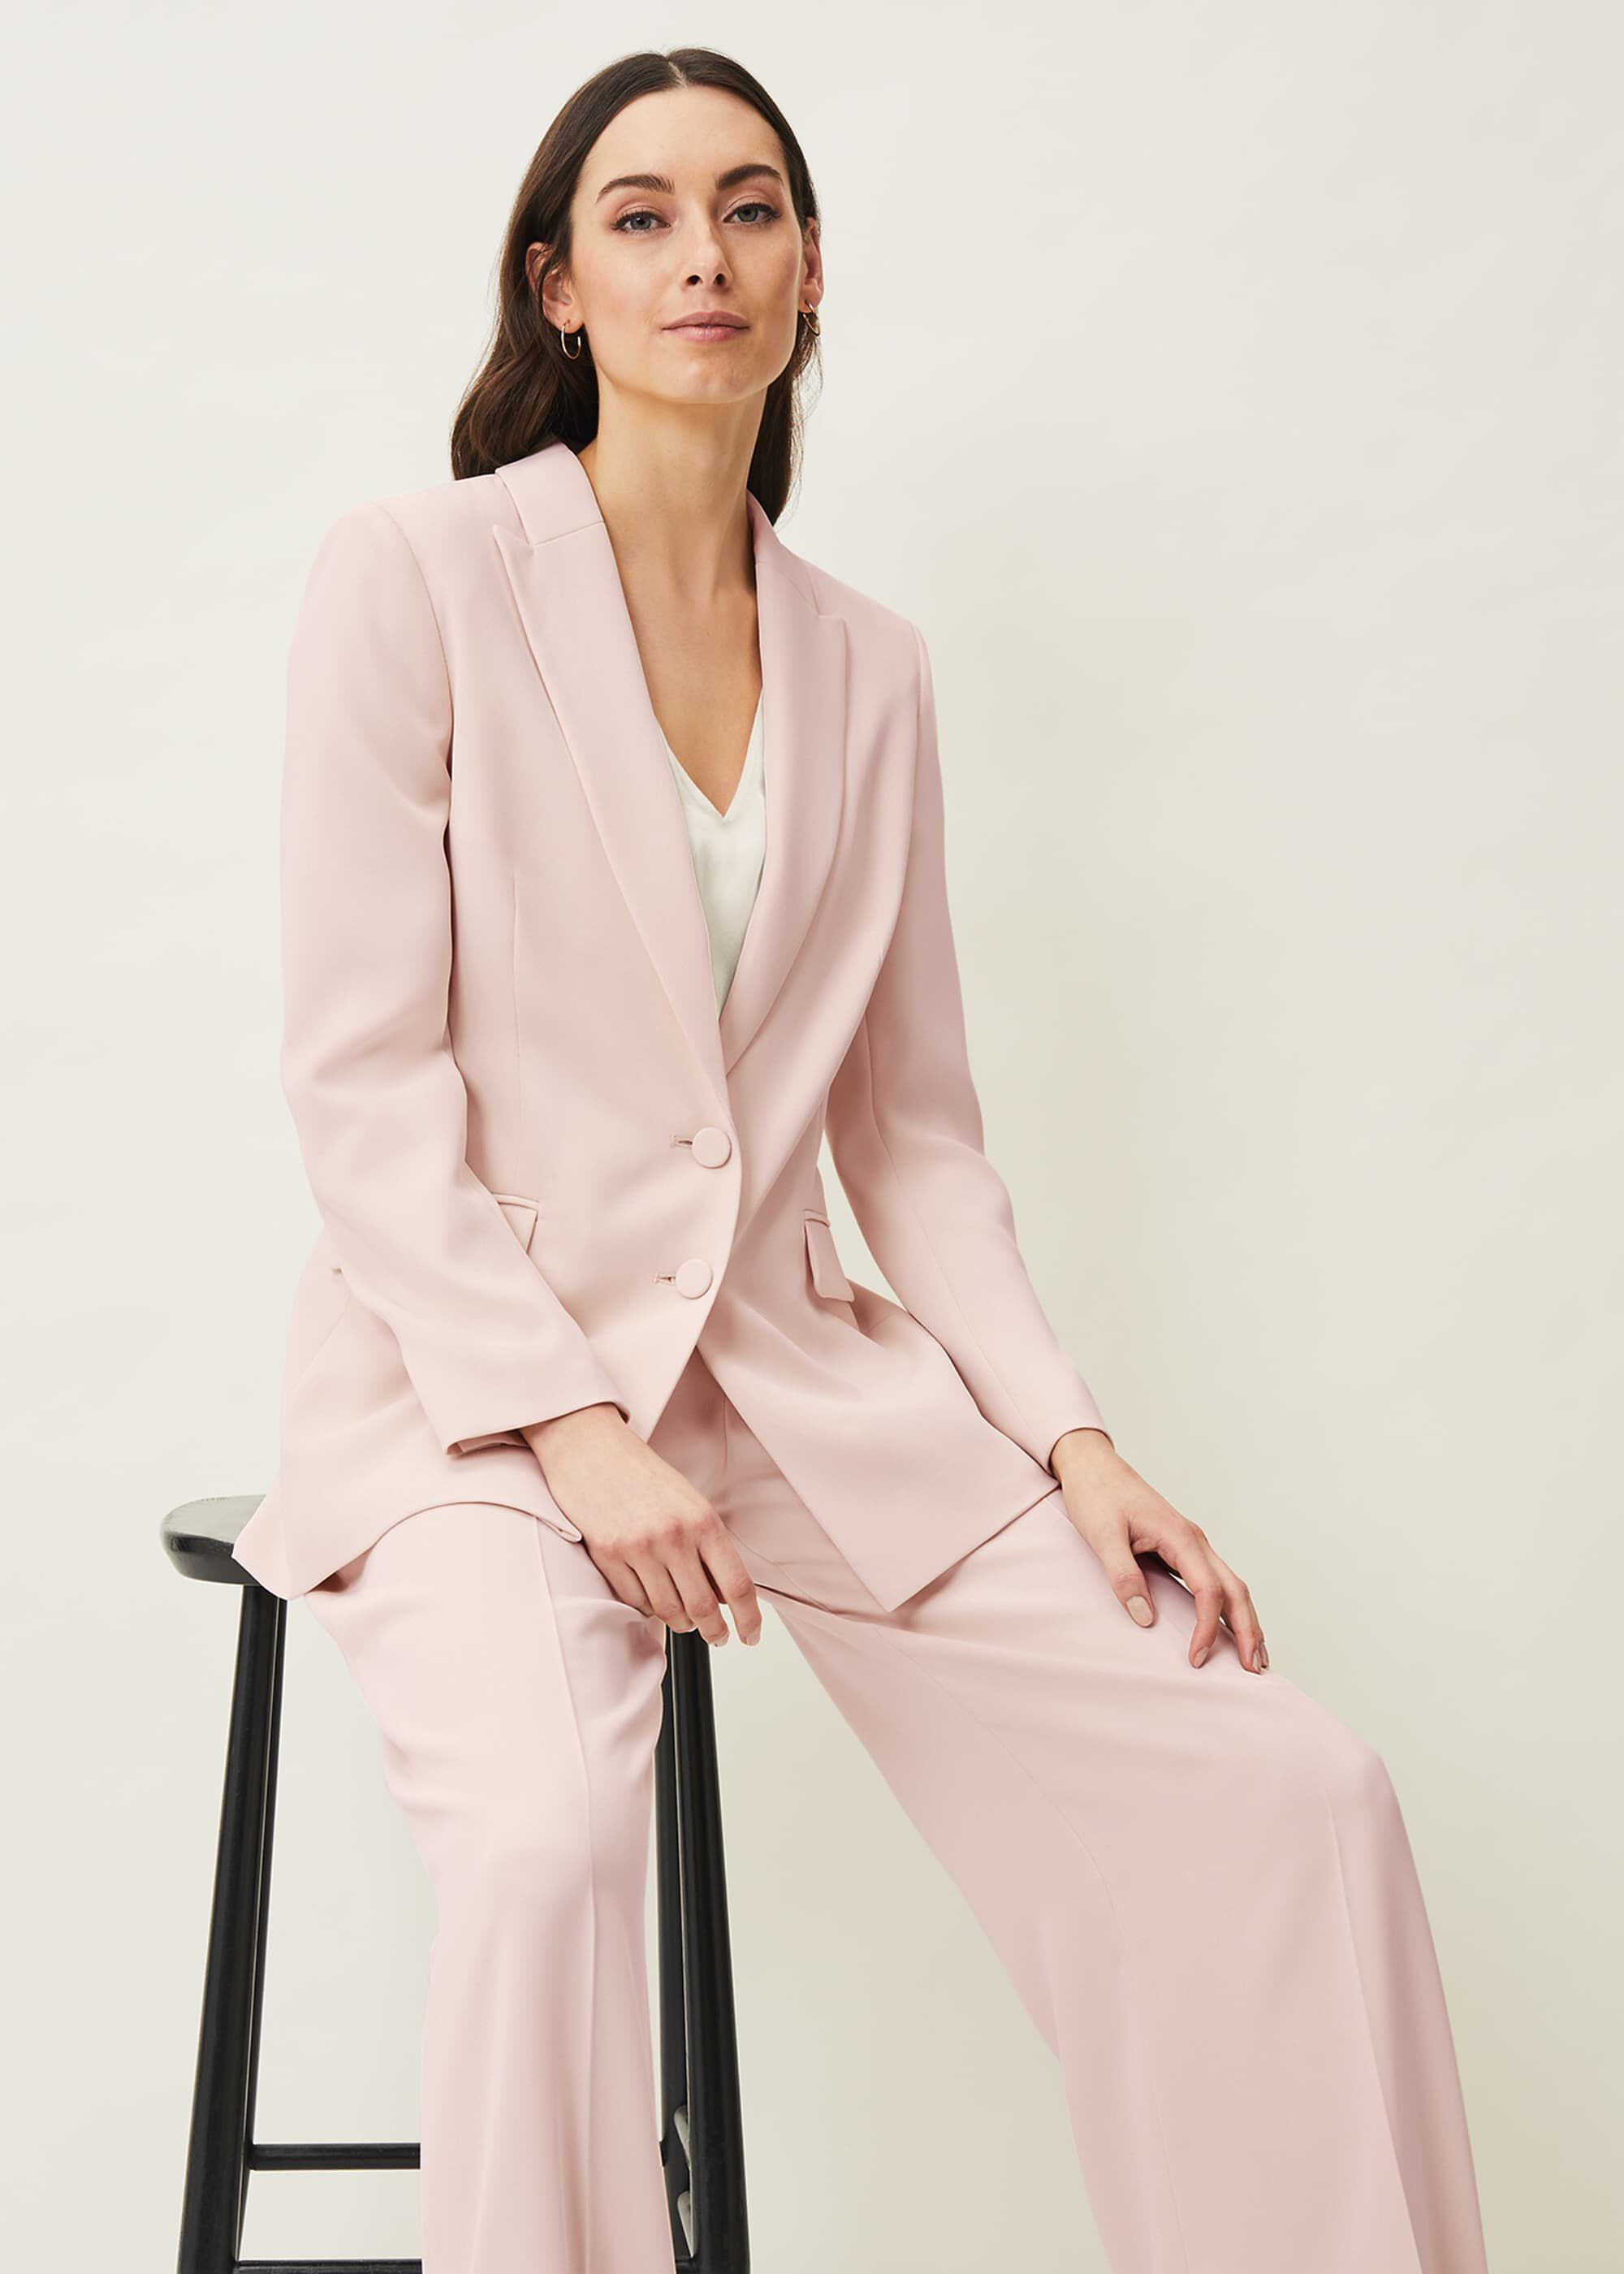 HOW TO STYLE THE PINSTRIPE TROUSER SUIT BY PHASE EIGHT  Lizzi Richardson